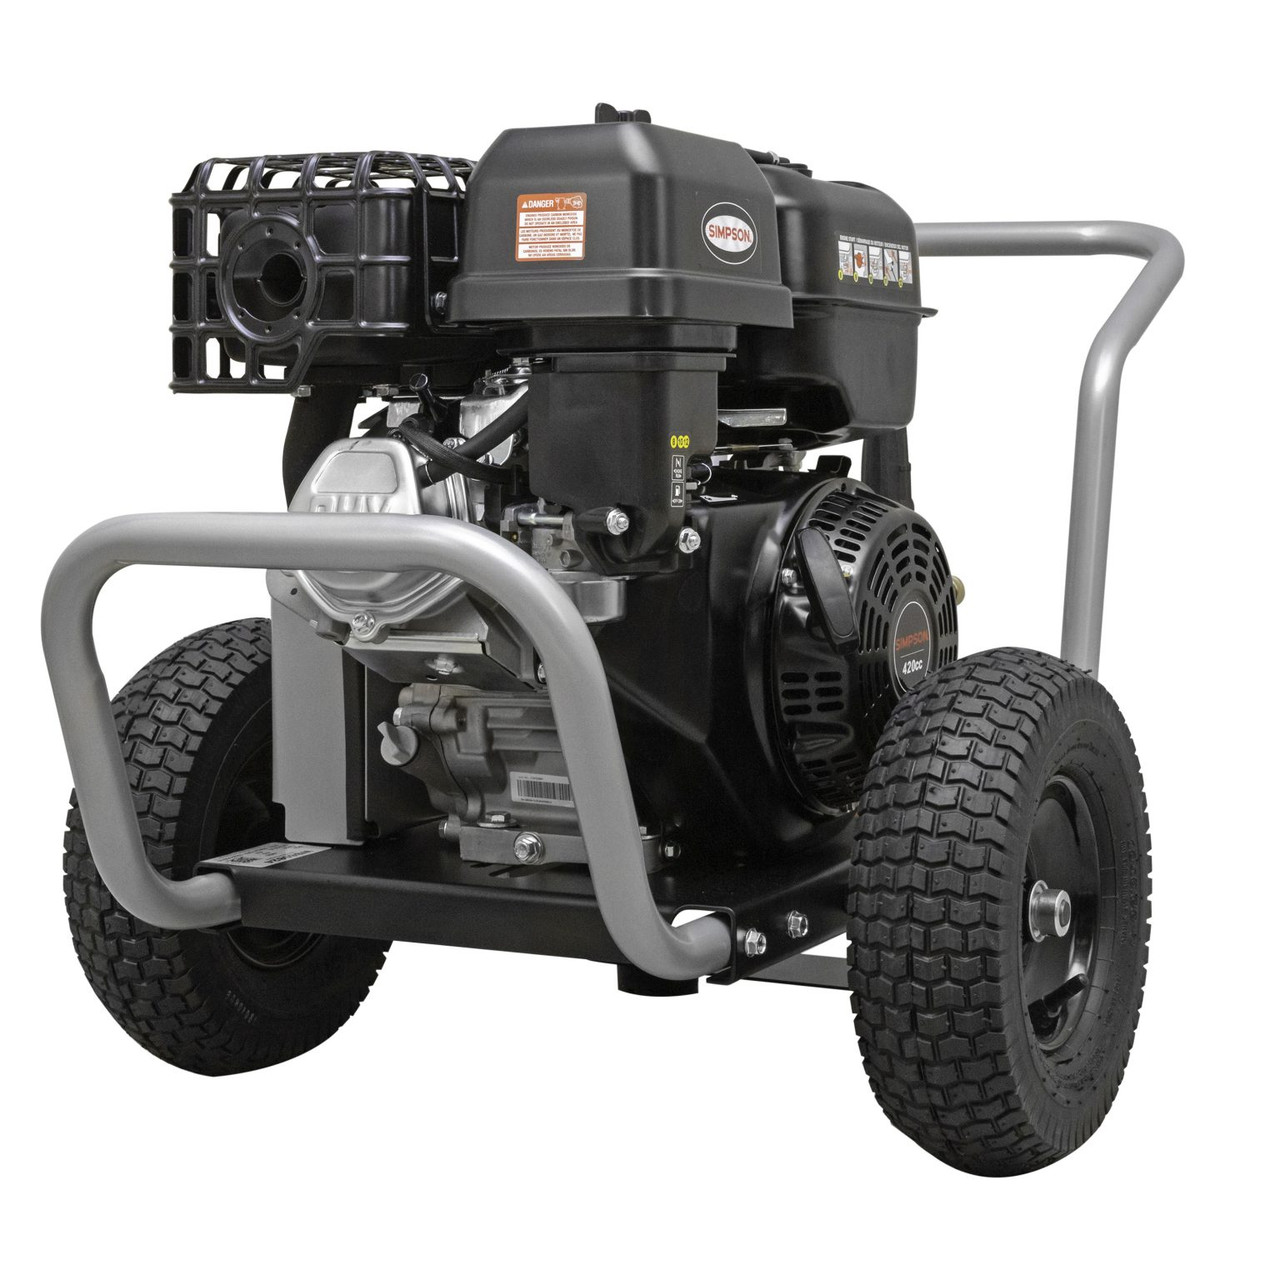 SIMPSON Water Blaster WB60824 Gas Pressure Washer 4400 PSI at 4.0 GPM